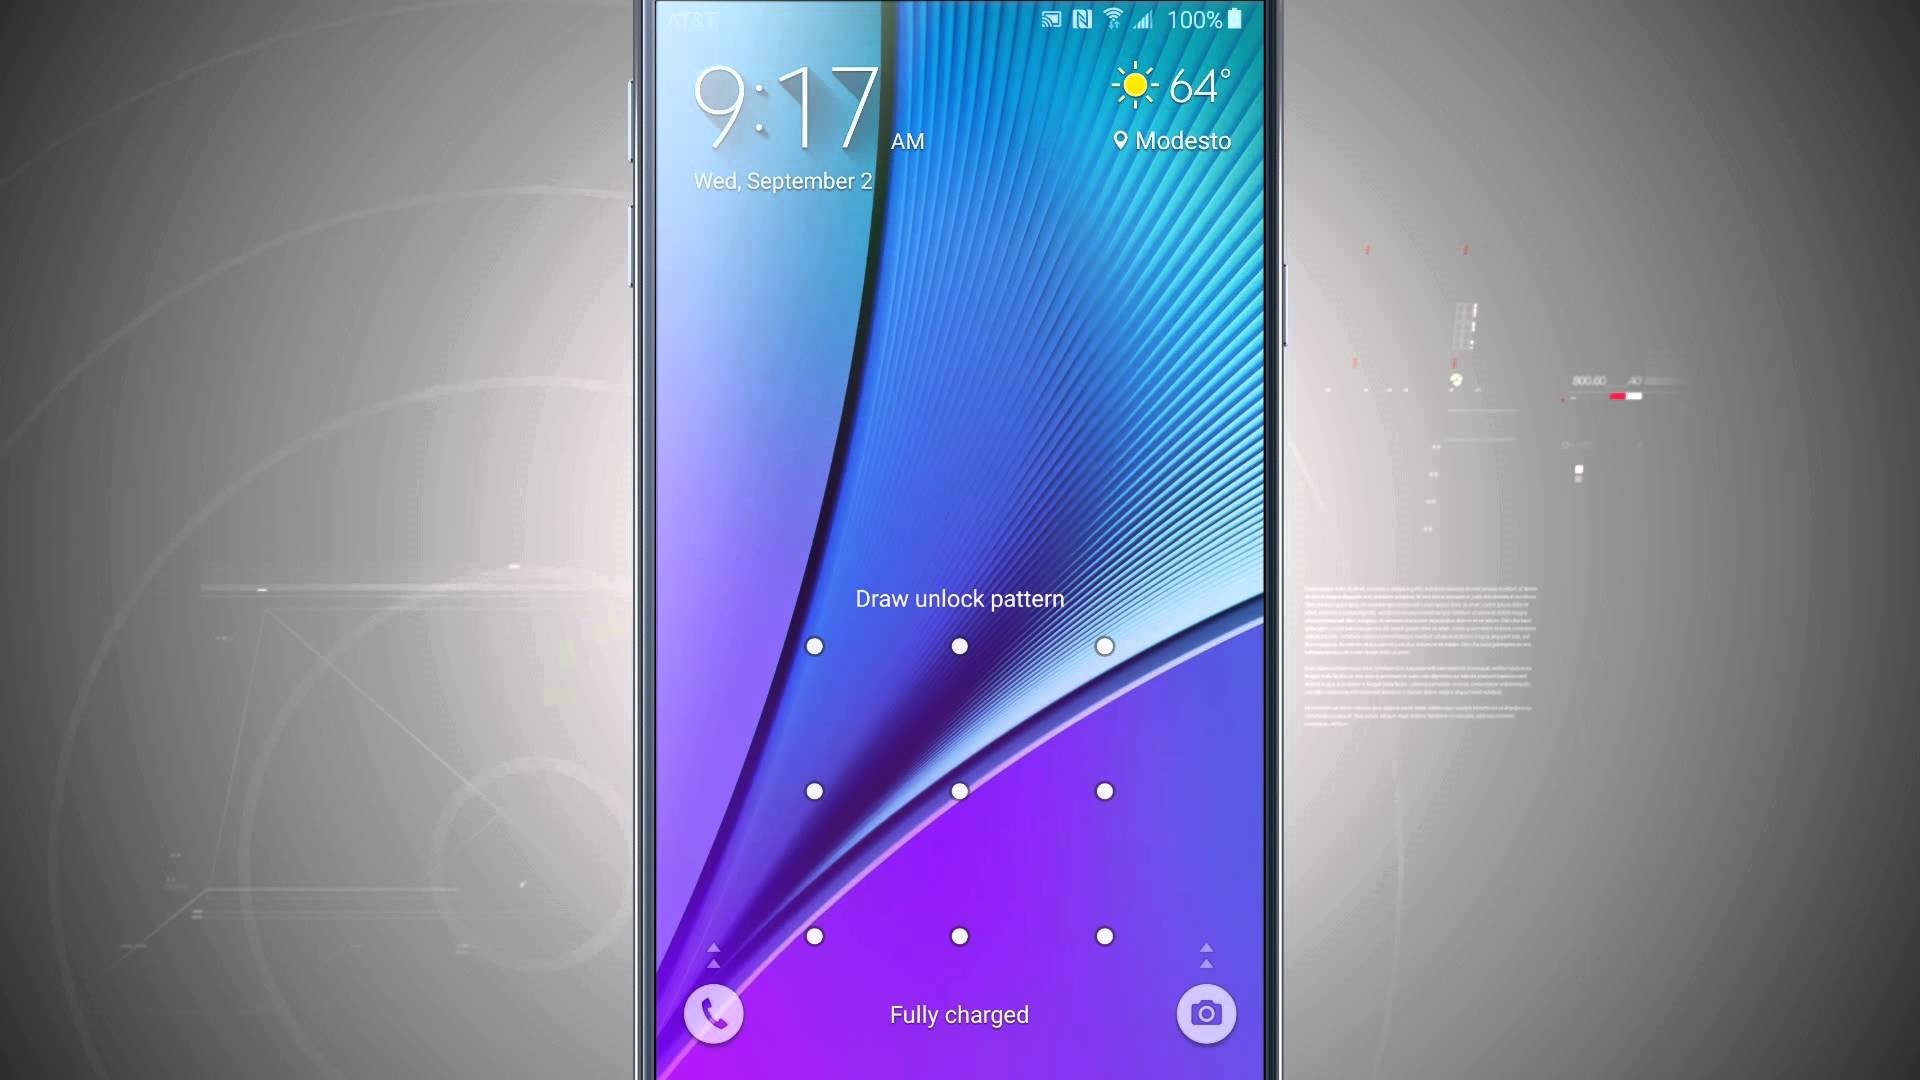 1920x1080 Lock Screen Galaxy Note 5 - Android Apps on Google Play